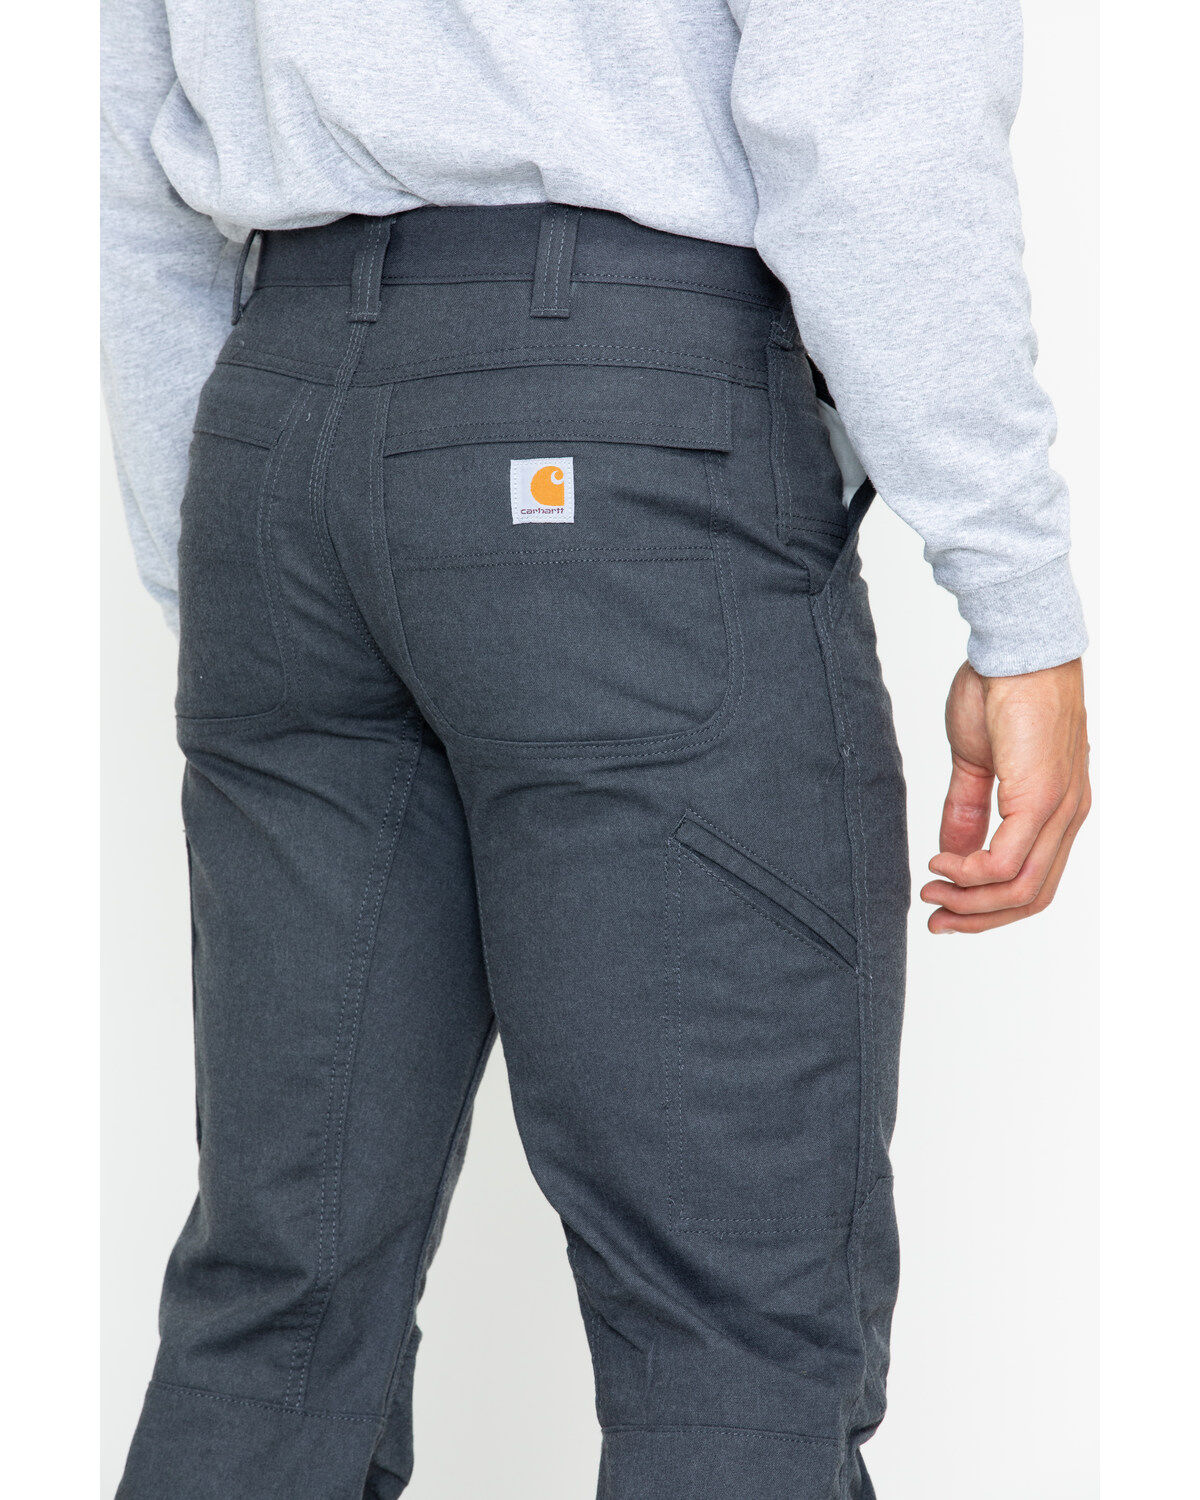 carhartt relaxed fit full swing pants